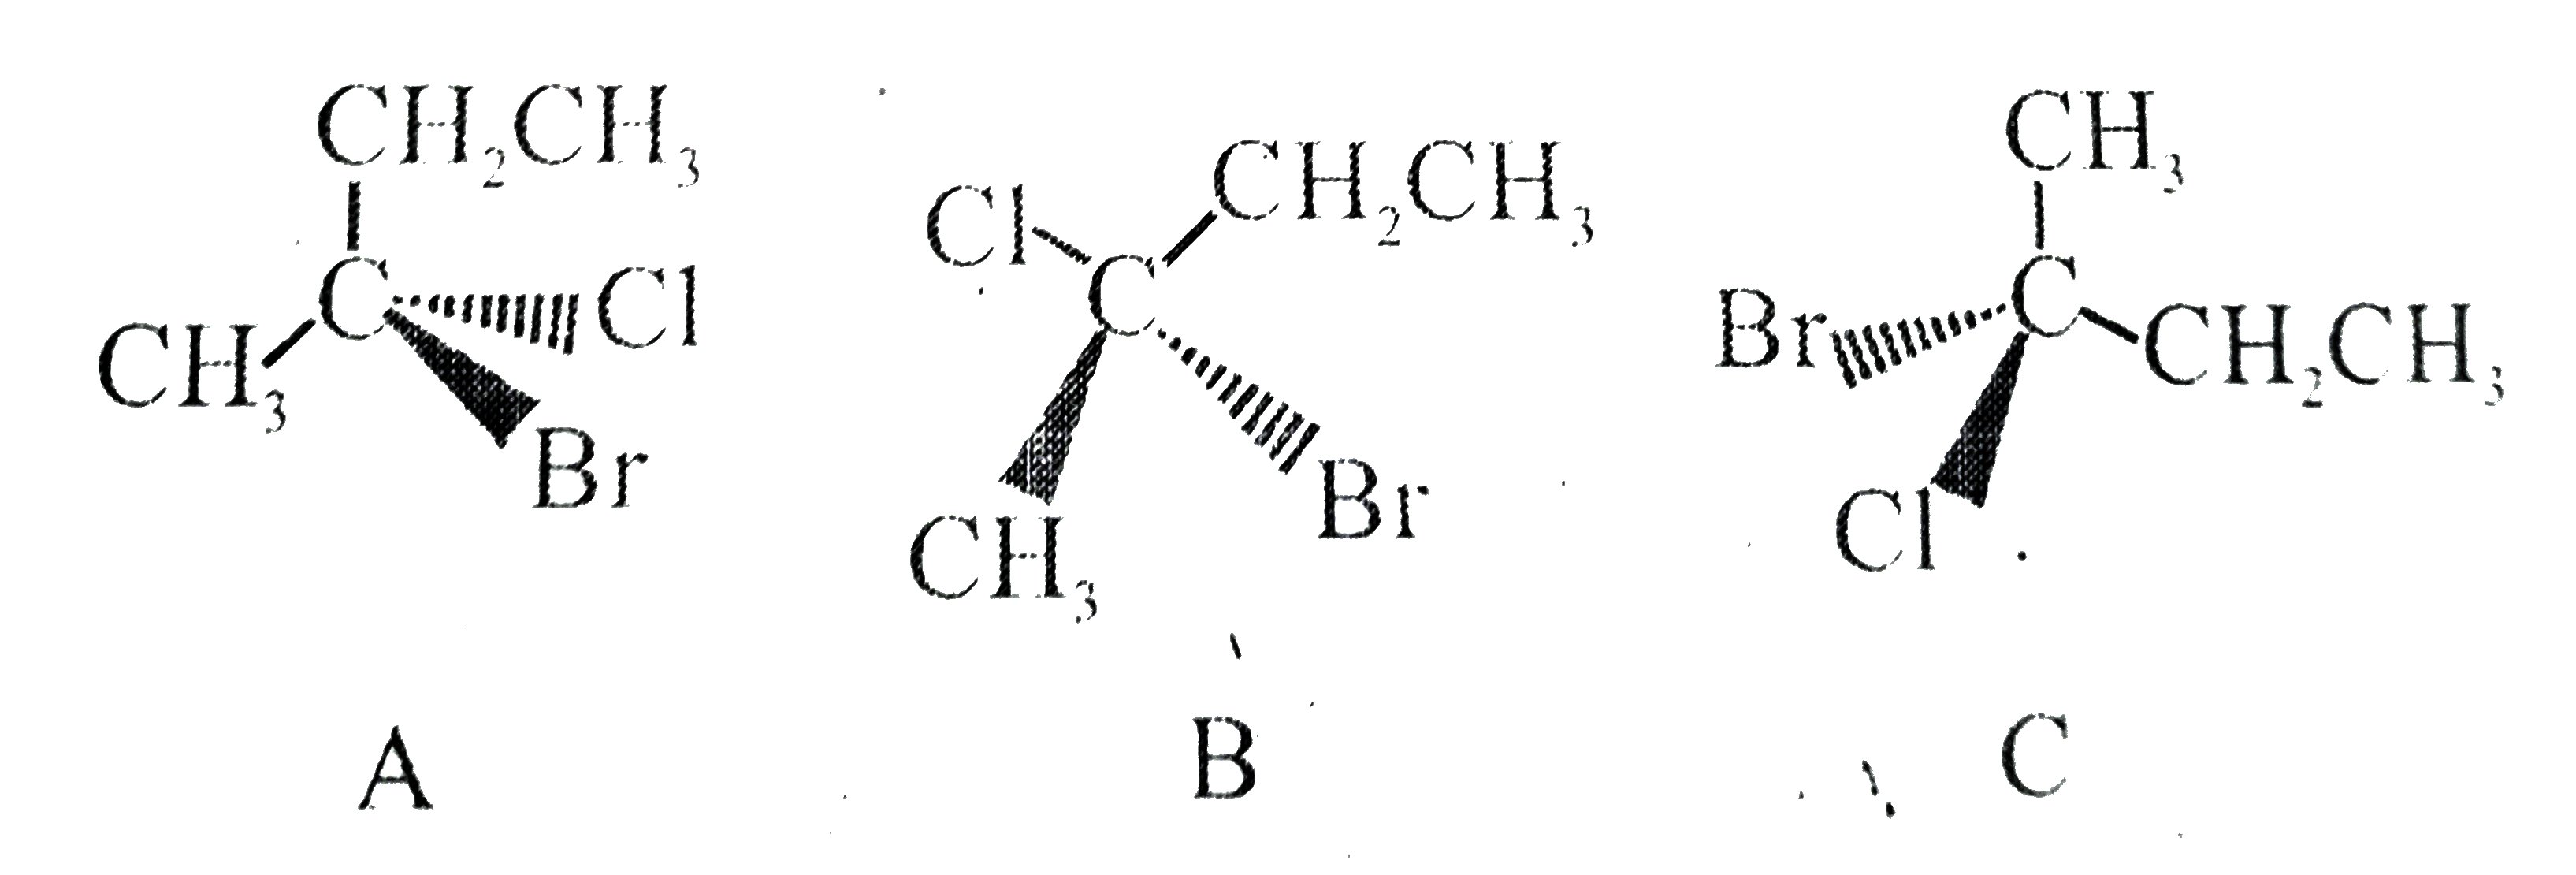 Which of the following statements is true about compounds A-C below?